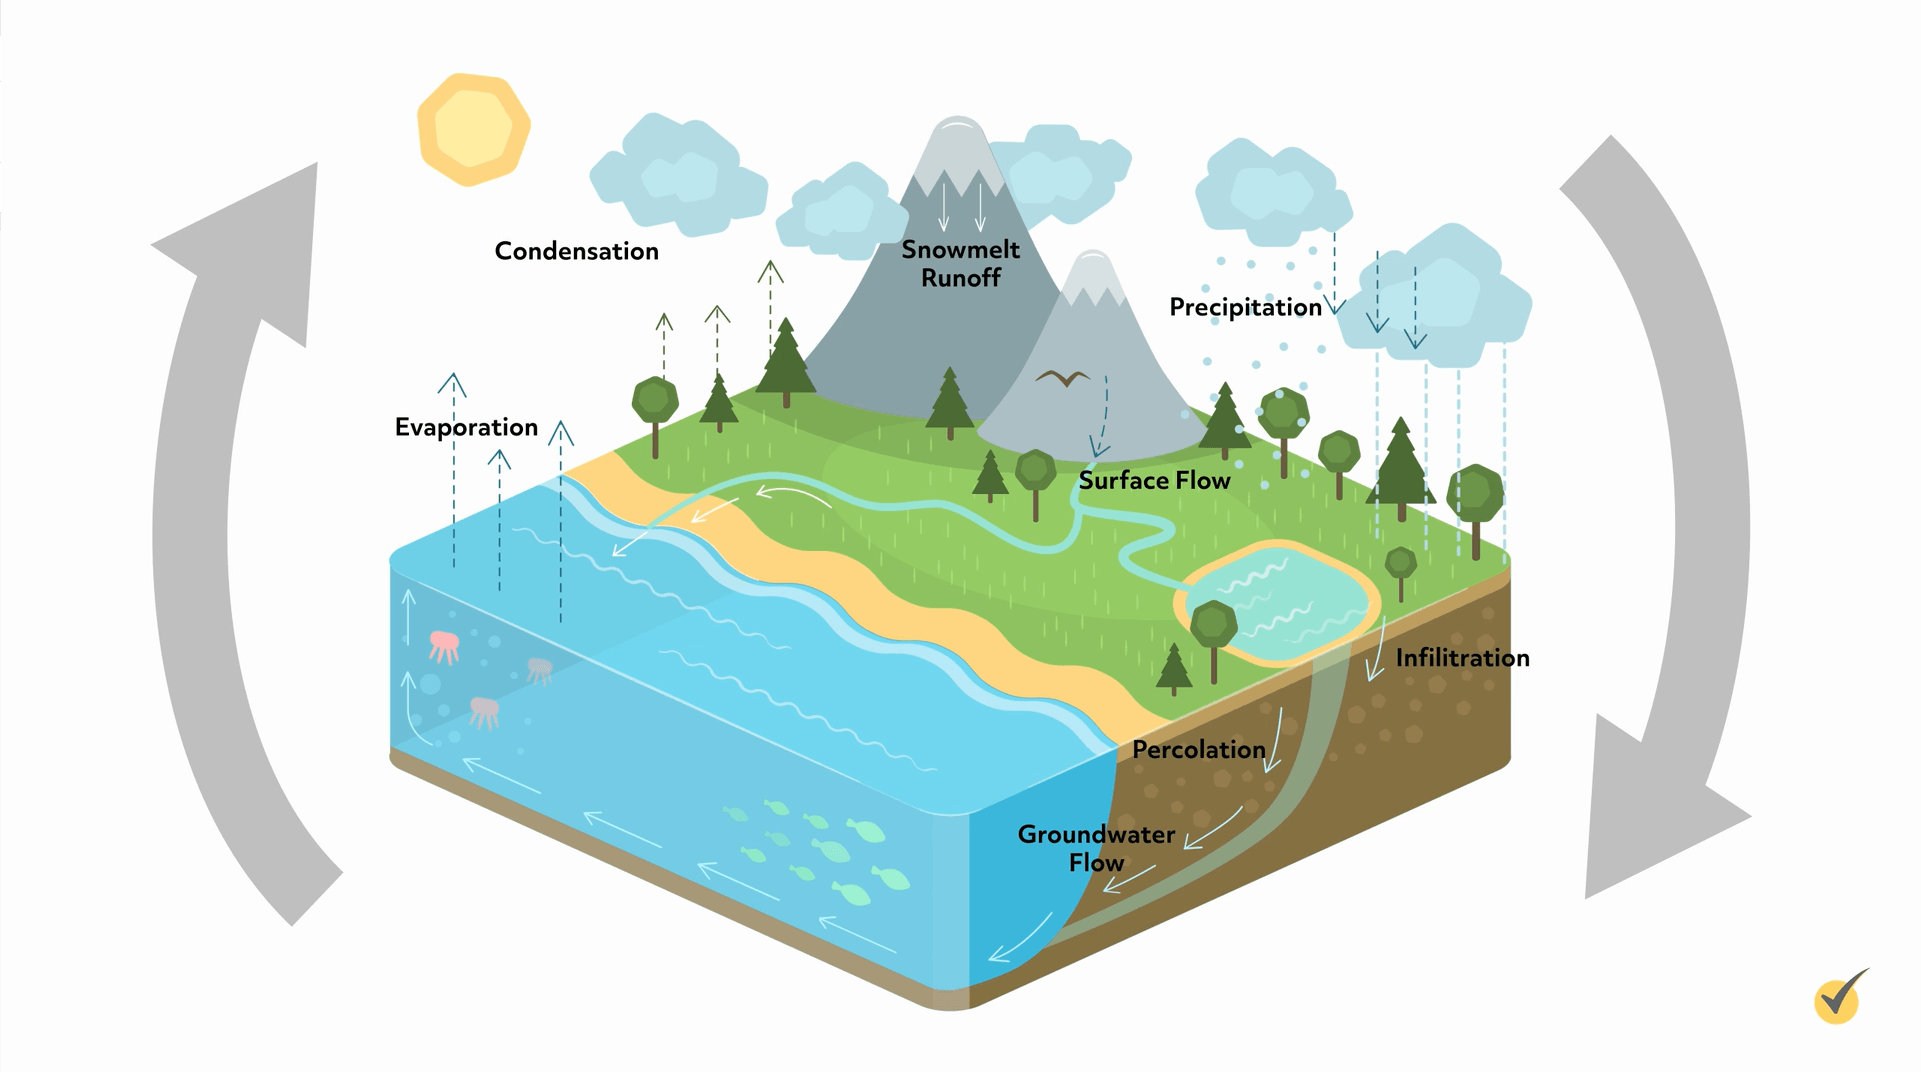 Image showing the hydrologic cycle. This shows how the snowmelt runoff ends up becoming surface flow into a body of water. From the body of water groundwater flows in streams to a larger body of water, where evaporation occurs, condensation, and precipitation. There are arrows showing that the cycle repeats itself in an endless cycle. 